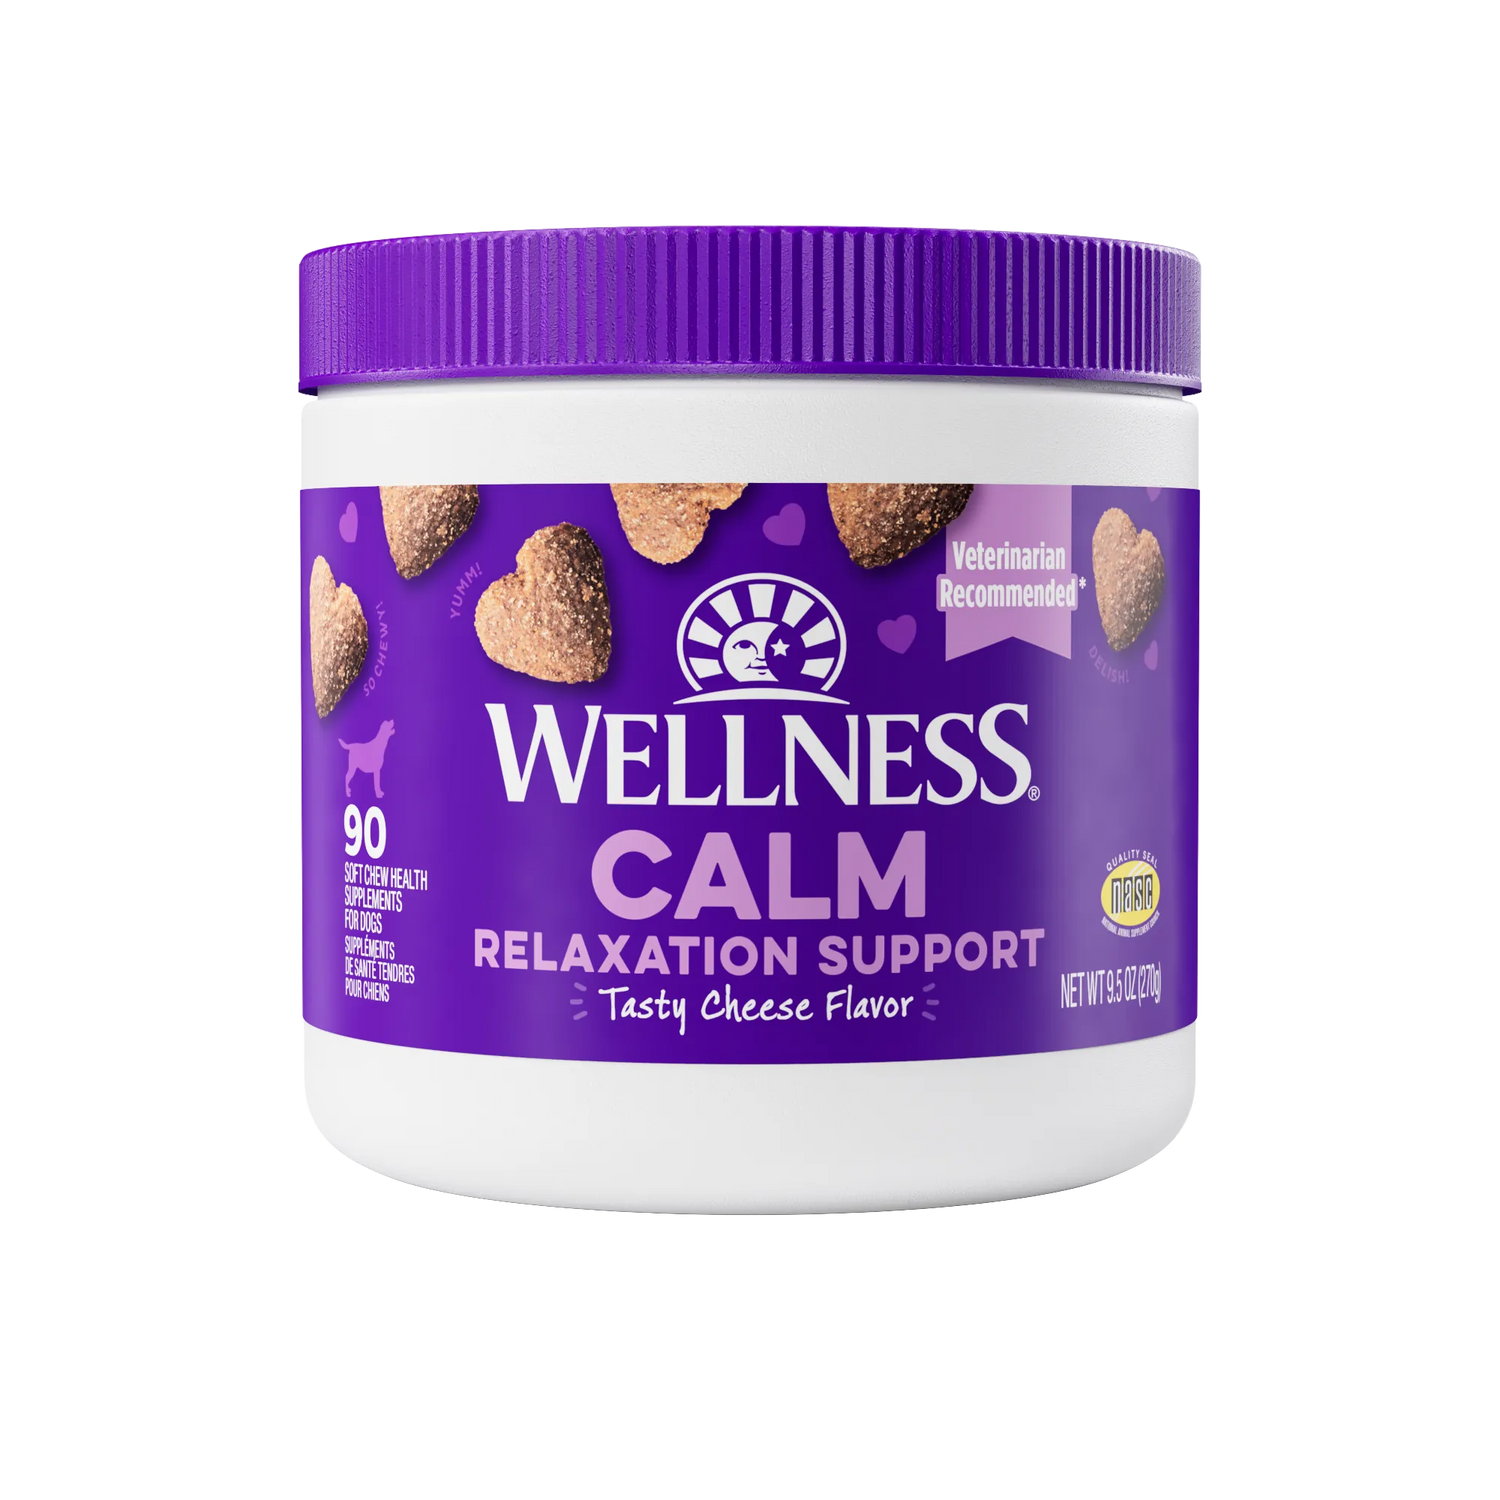 Wellness - Calm - Cheese Flavored Relaxation Support Chews